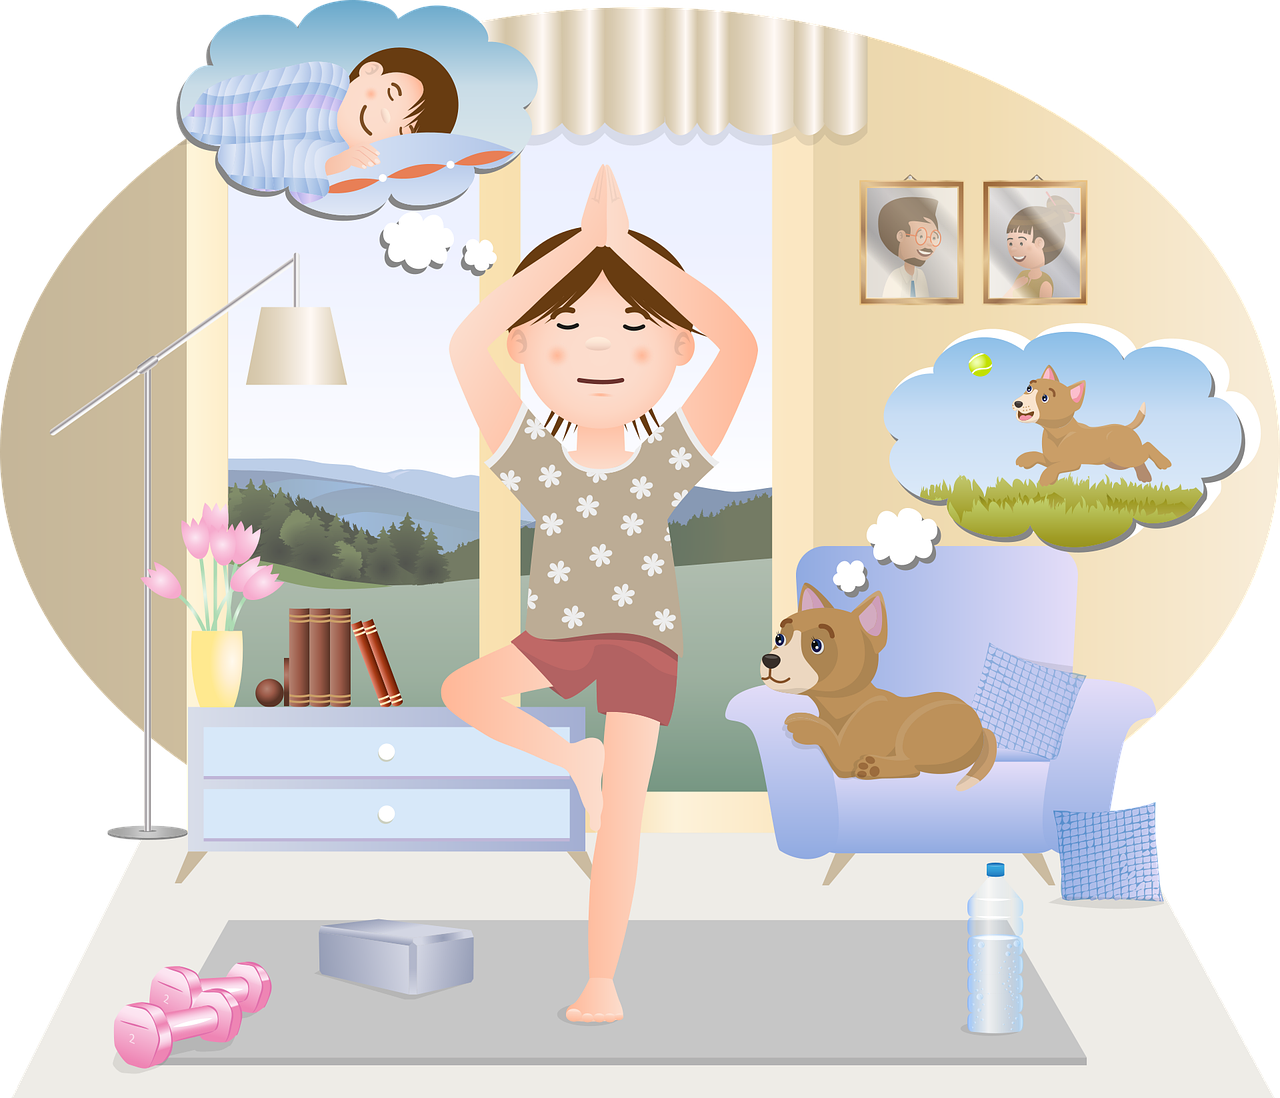 An illustration of a person doing vrksasana (tree) pose in their living room, while their dog looks on. Both the person and the dog have thought bubbles depicting things they would rather be doing: the person wants to be back in bed, and the dog wants to be running around in the lawn you can see out the windows behind where the person is practicing.